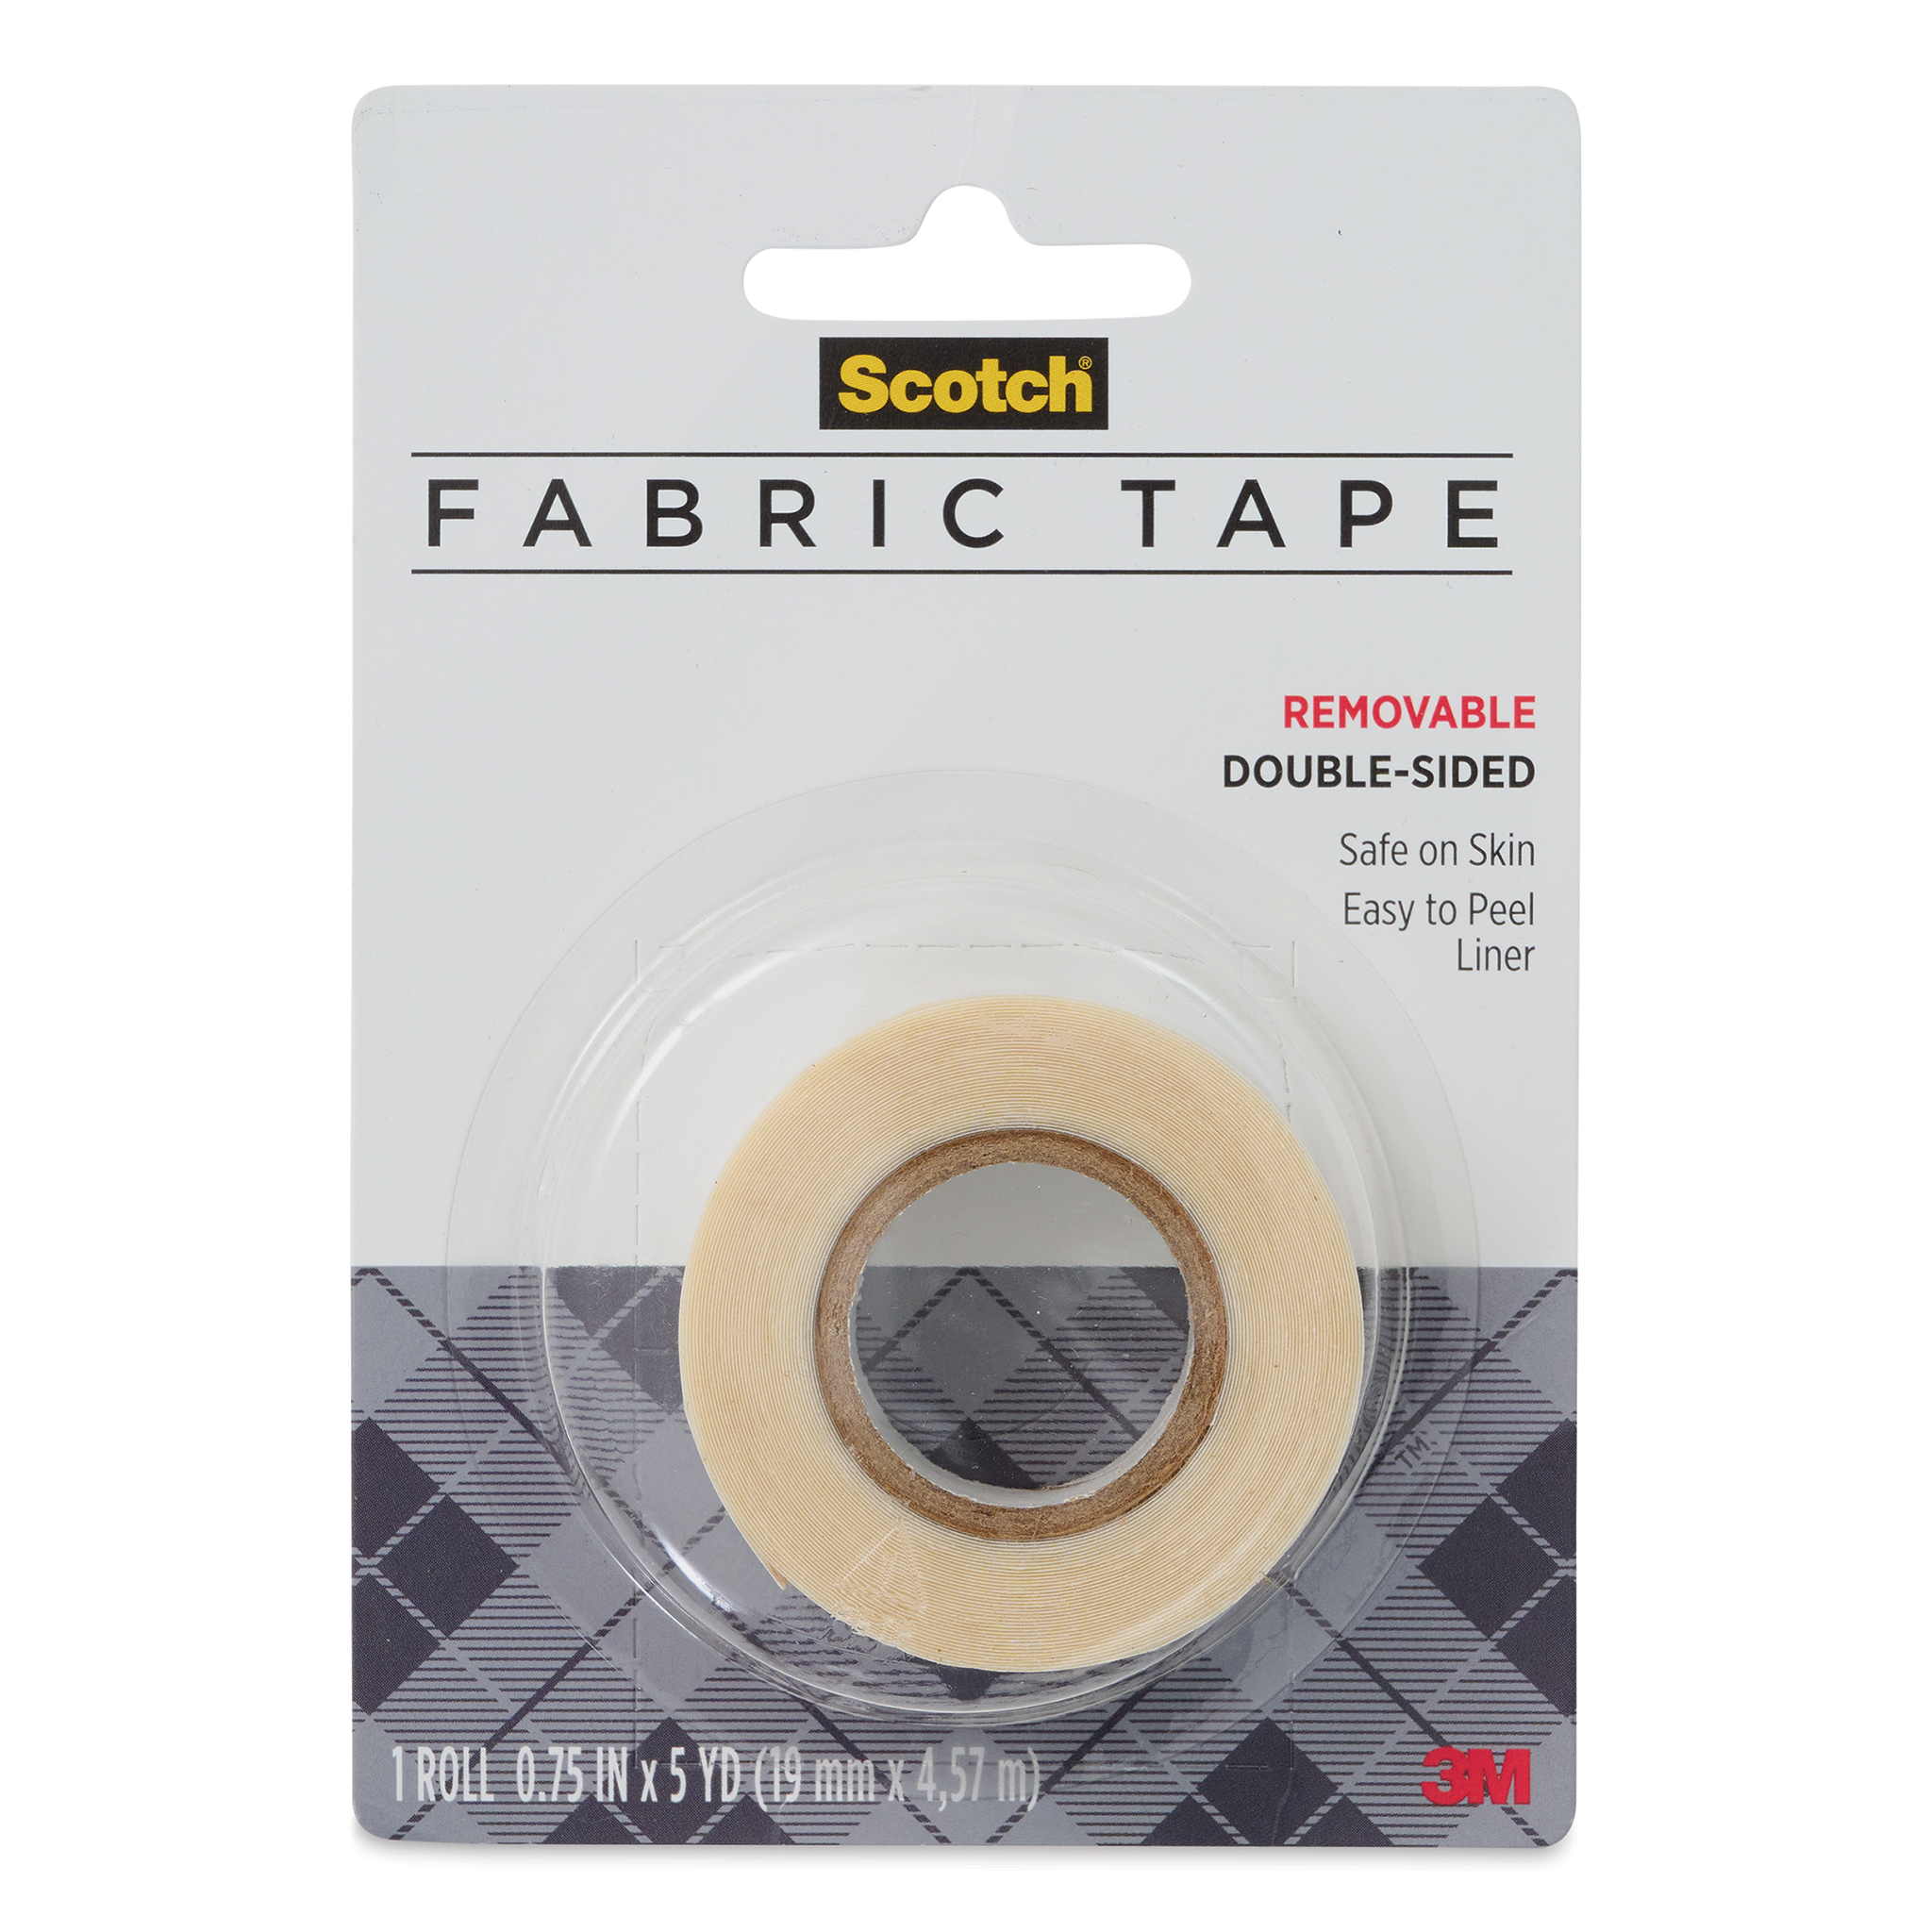  Scotch Removable Fabric Tape, 3/4 in x 180 in, 1/Pack